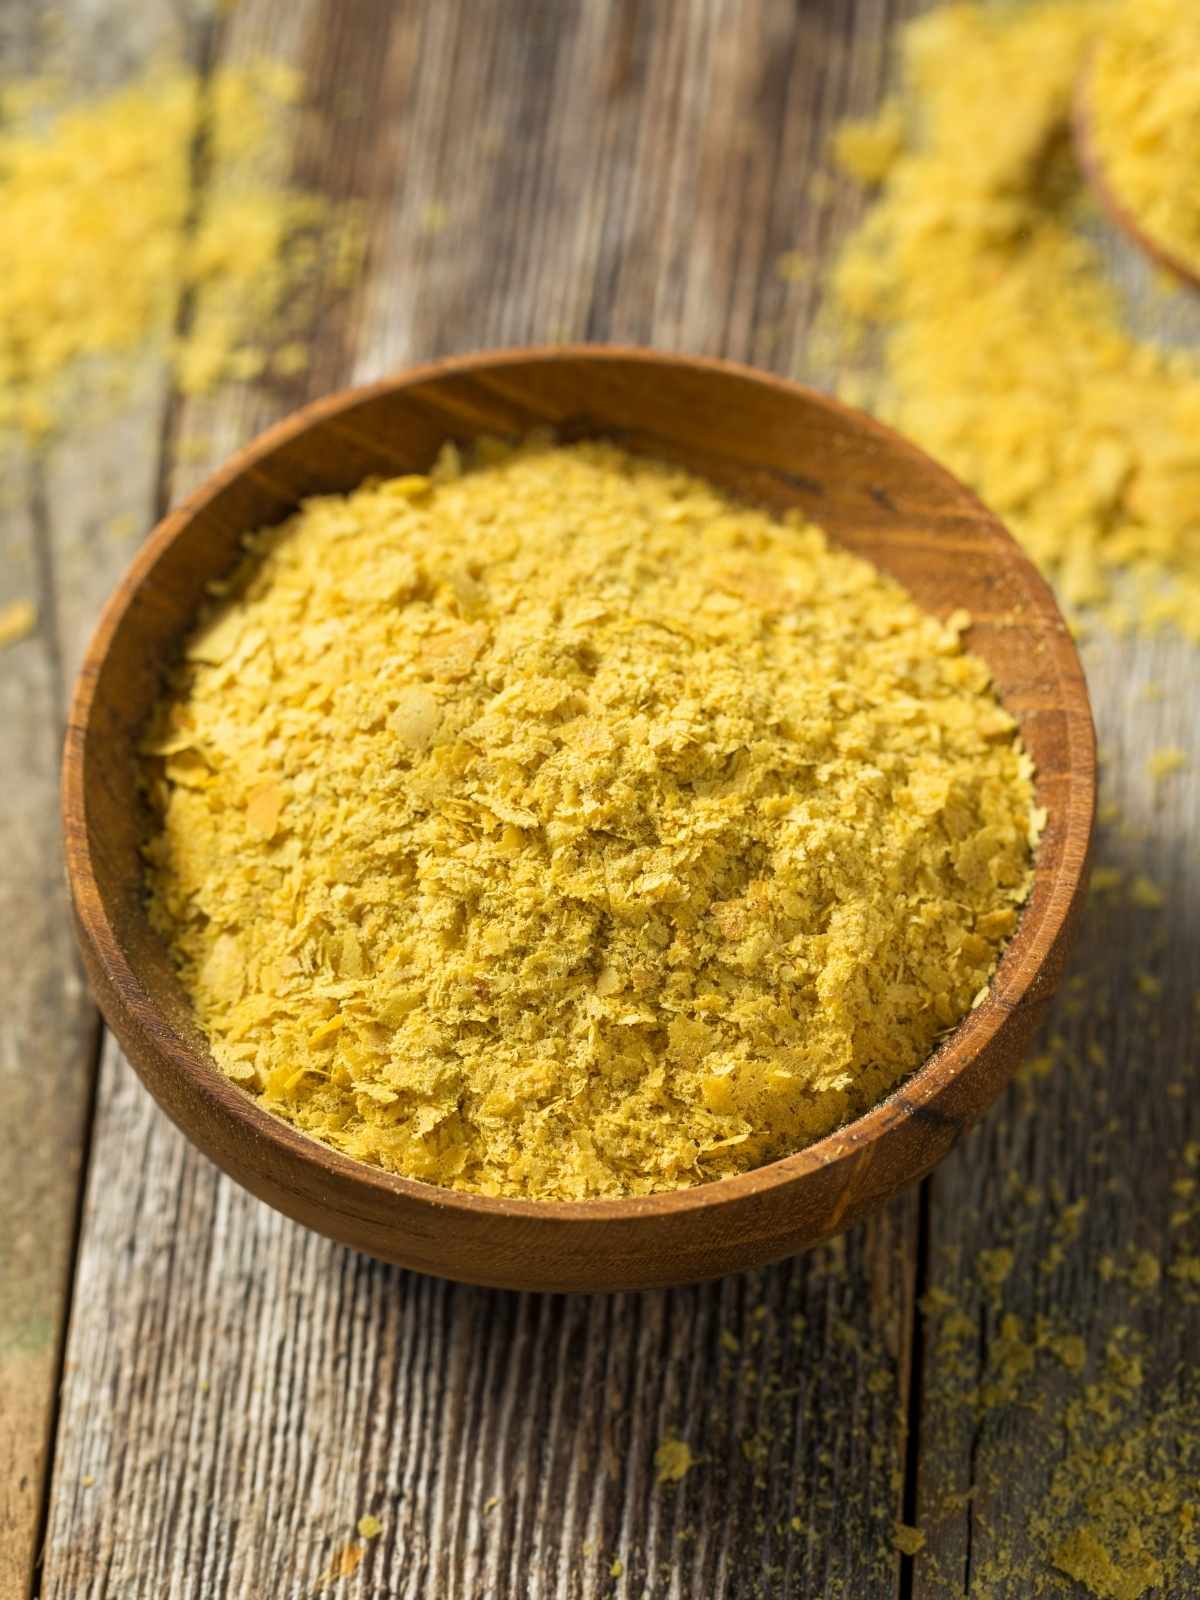 Nutritional yeast in a small bowl on a wooden surface.